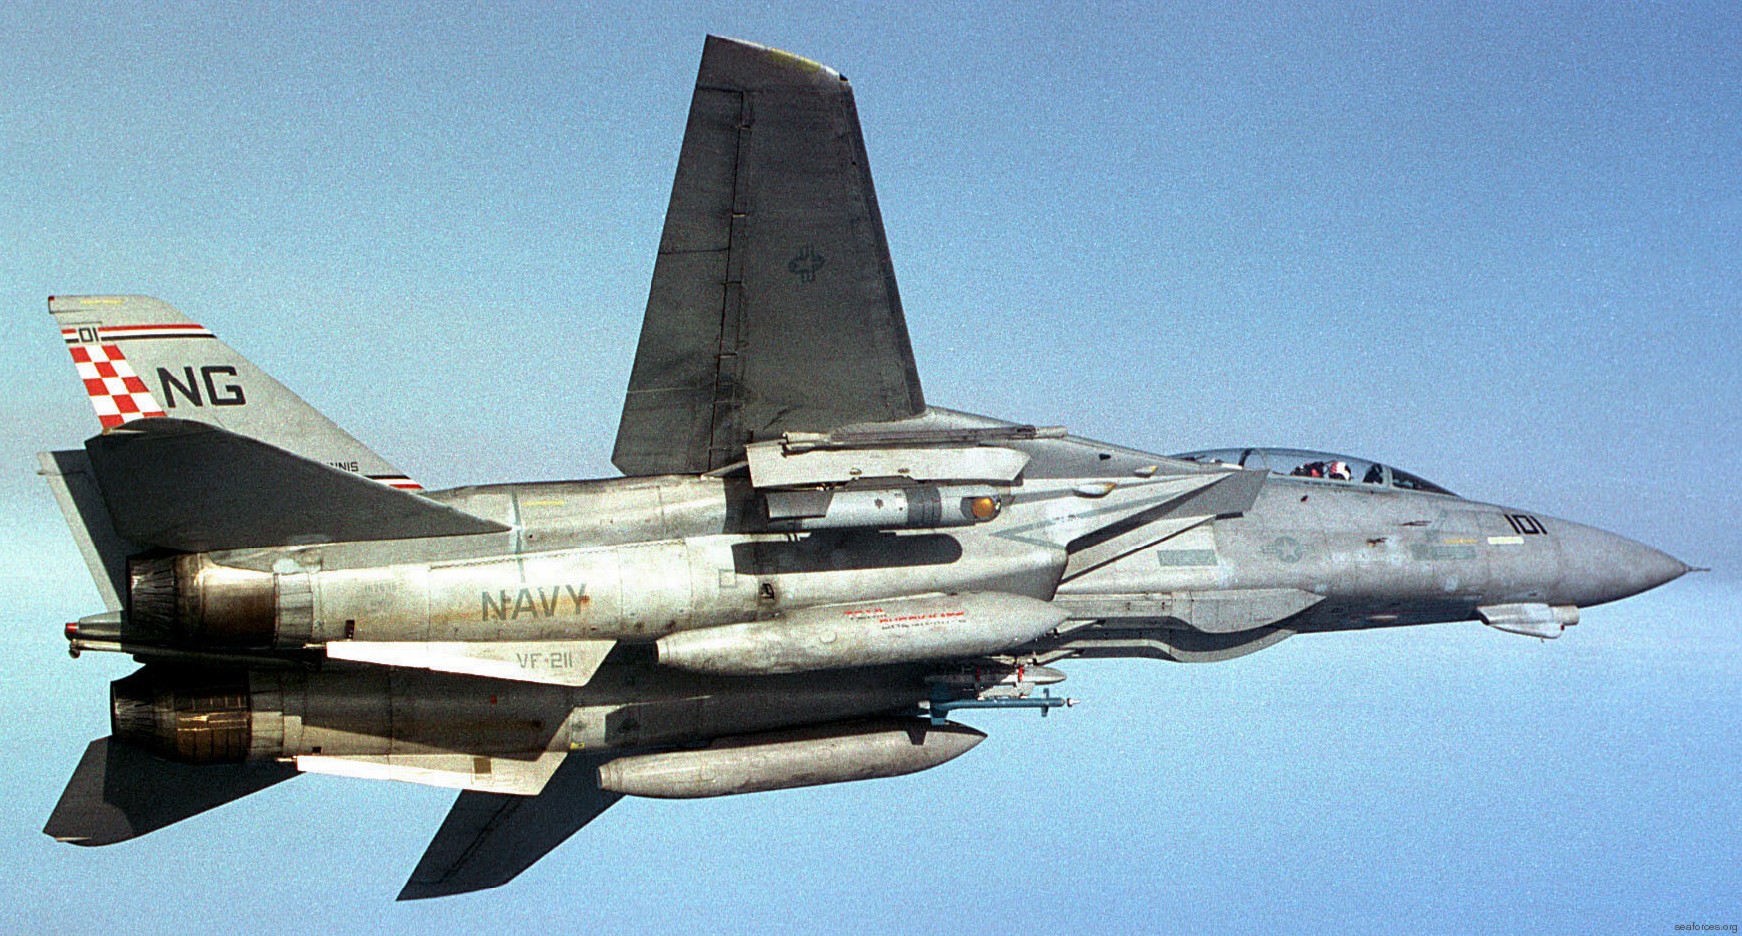 vf-211 fighting checkmates fighter squadron us navy f-14a tomcat carrier air wing cvw uss cvn nas oceana virginia 61x